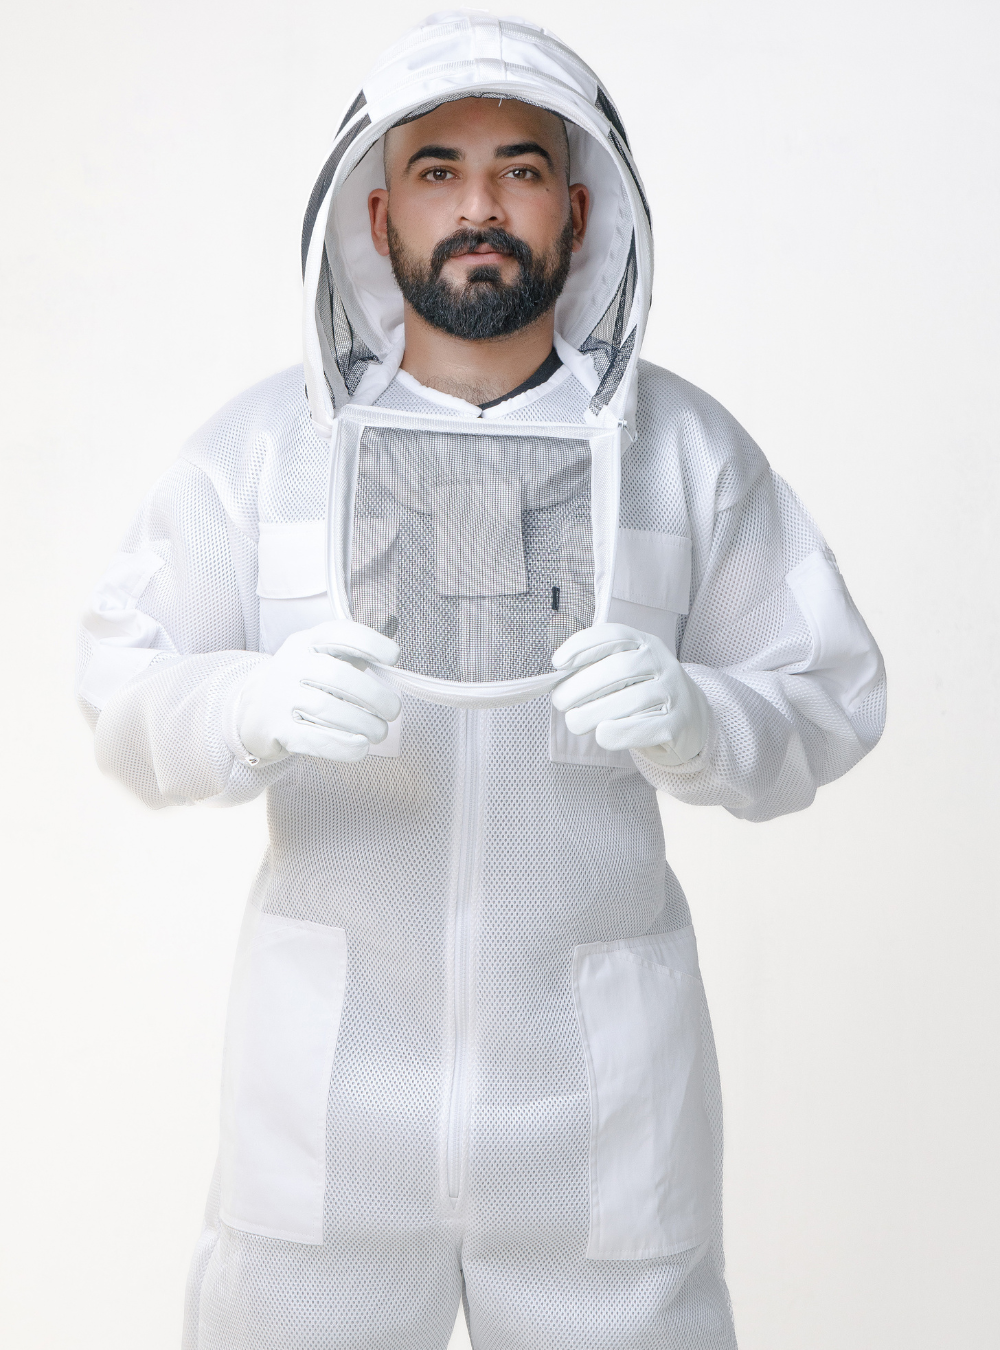 The beekeeper is wearing AirFlow Pro Beekeeping with open Face Zipper Closeup.